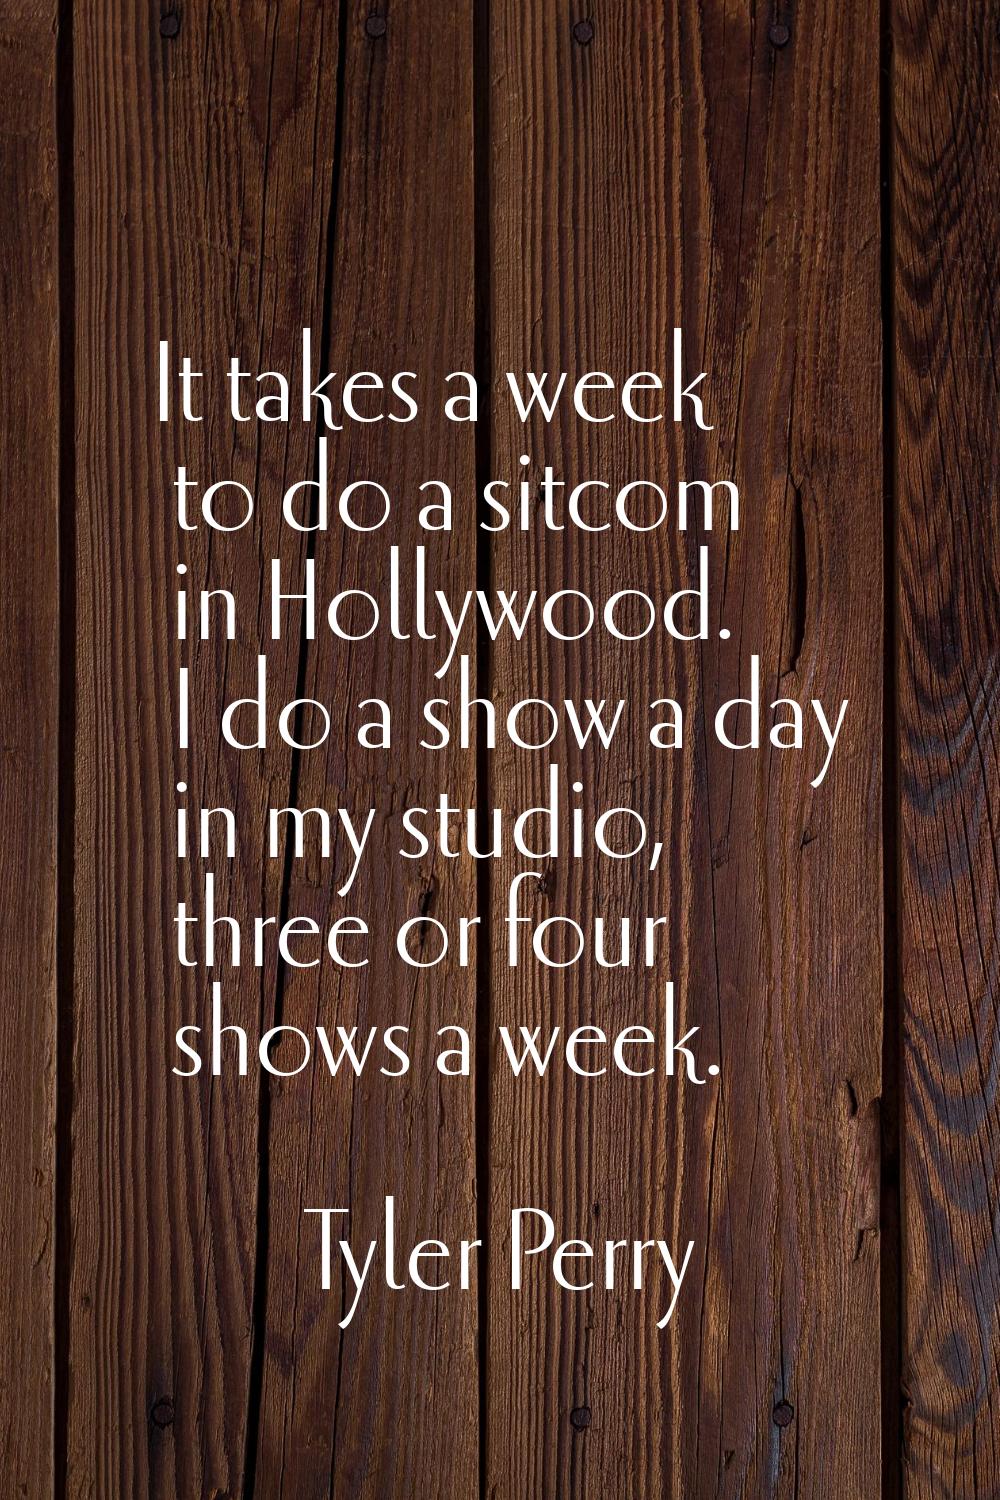 It takes a week to do a sitcom in Hollywood. I do a show a day in my studio, three or four shows a 